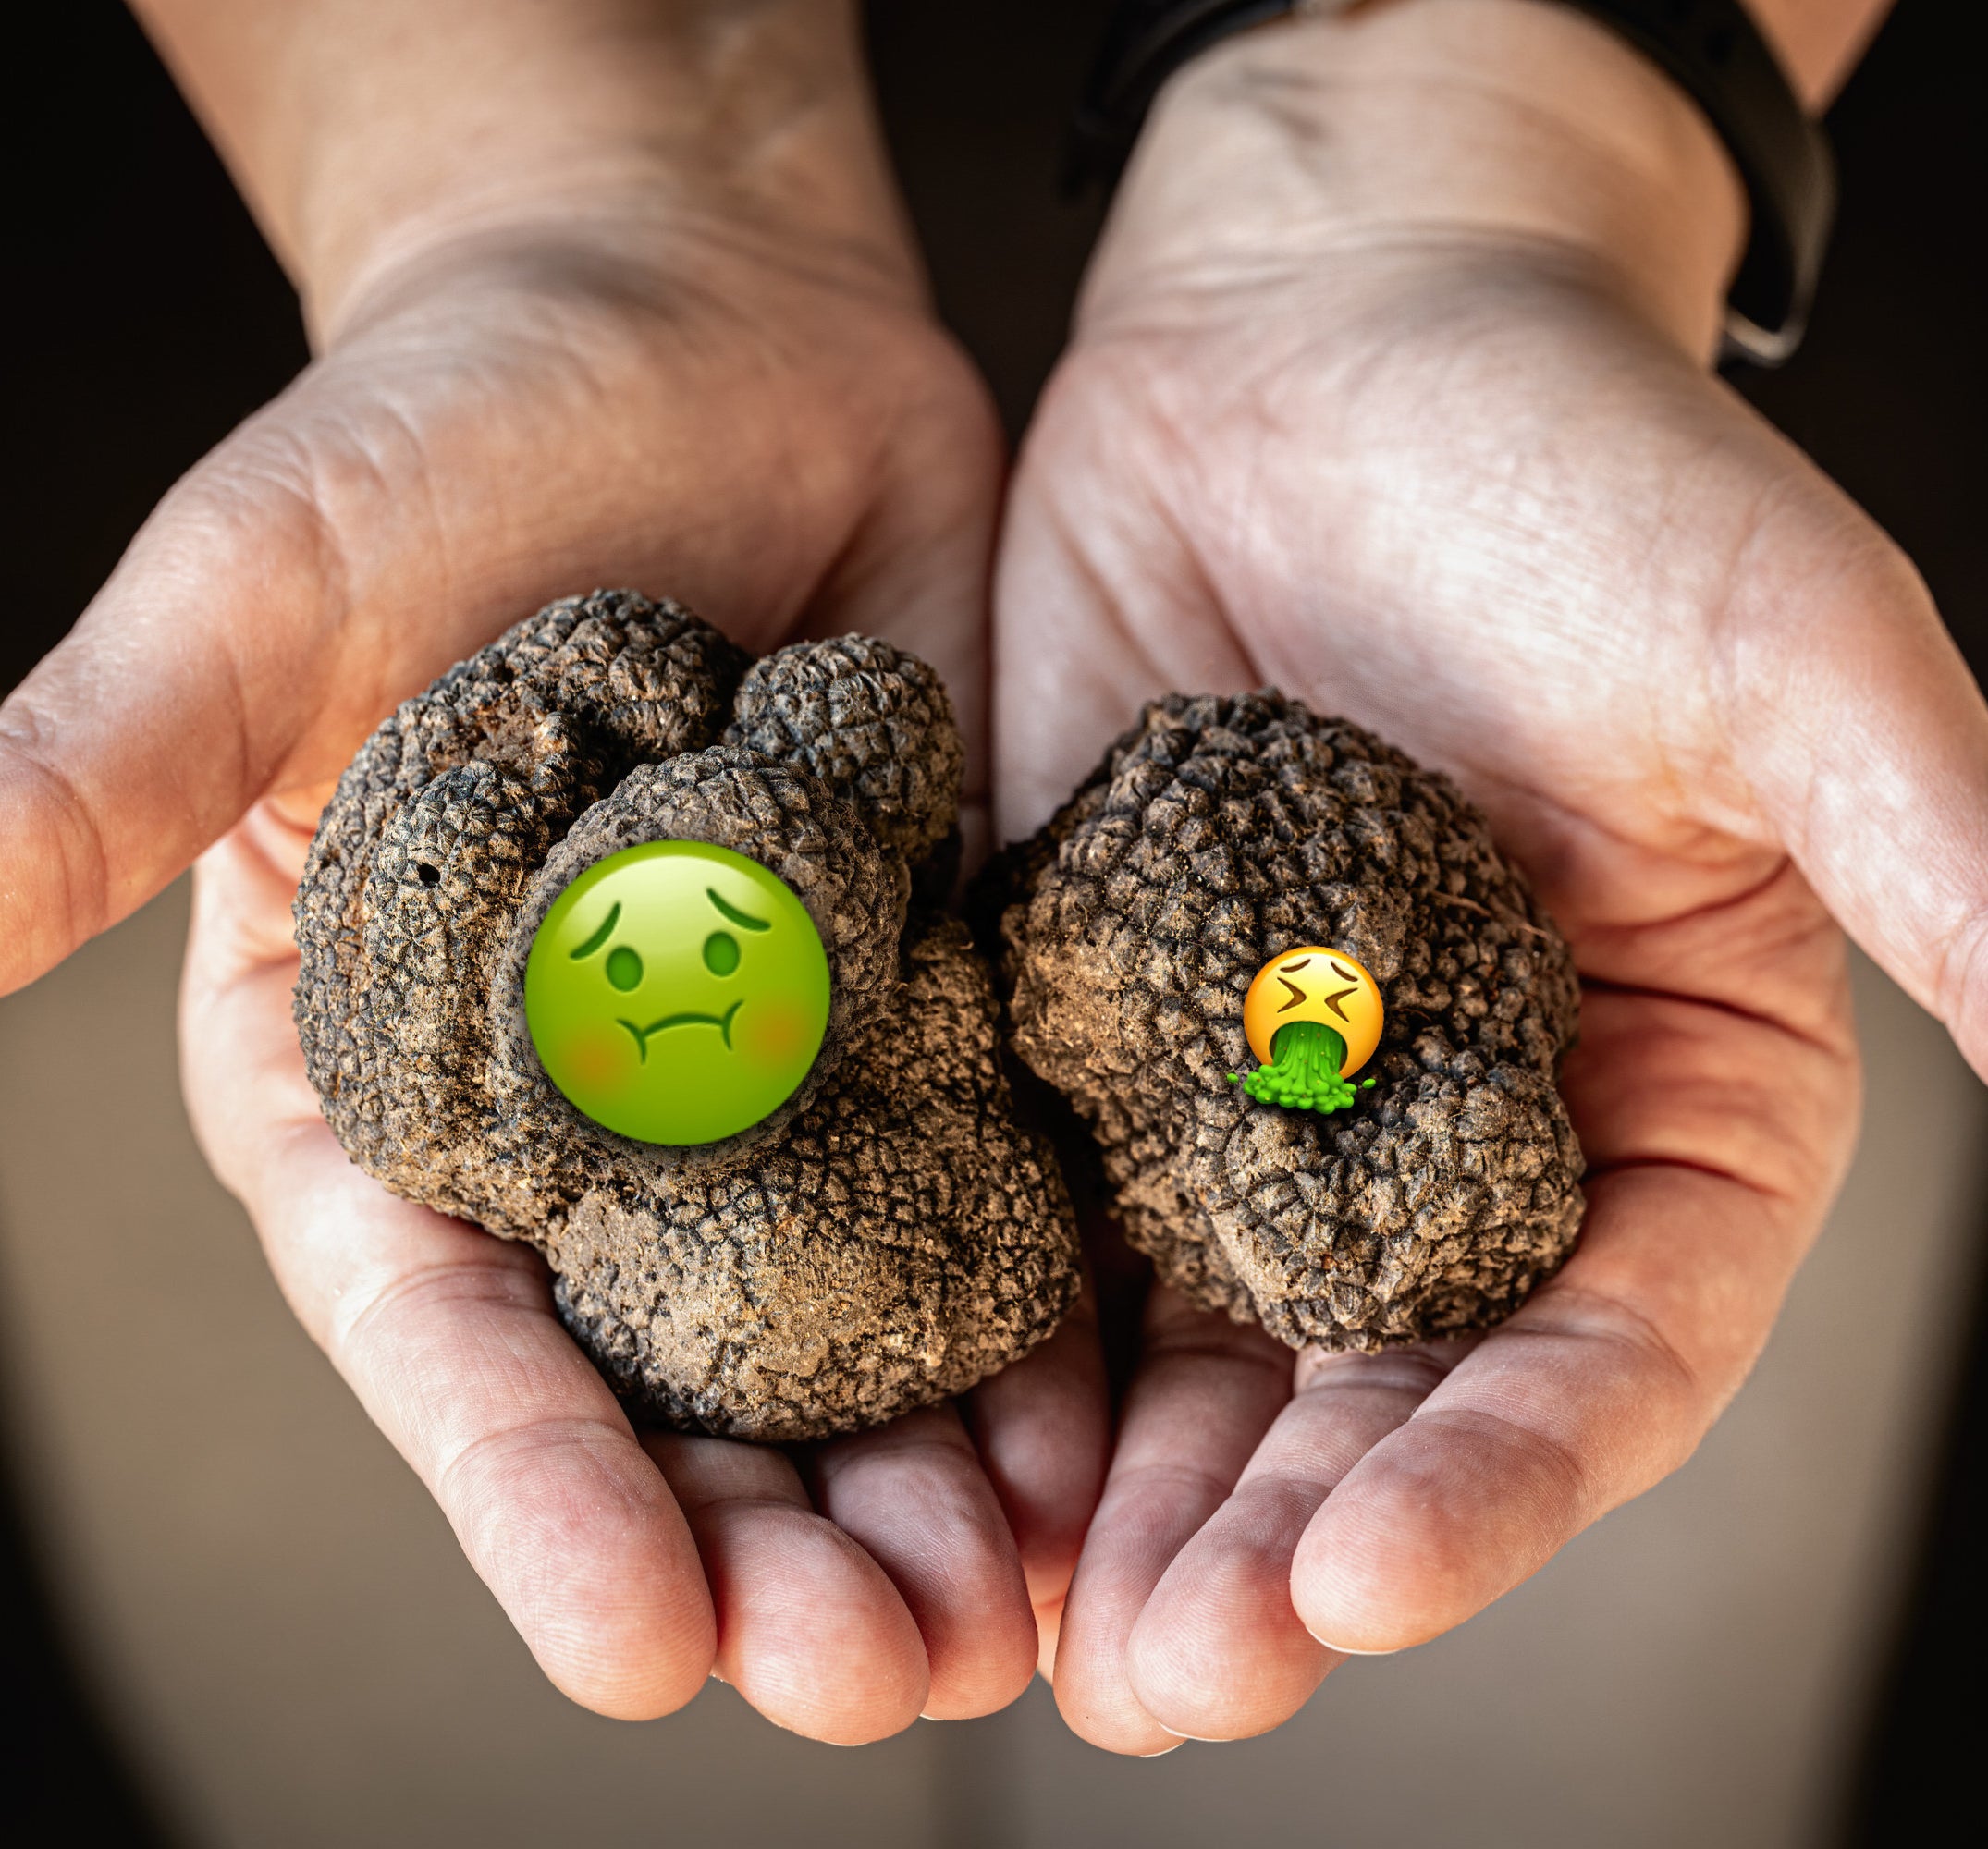 Vomit emojis placed over two truffles being held by someone